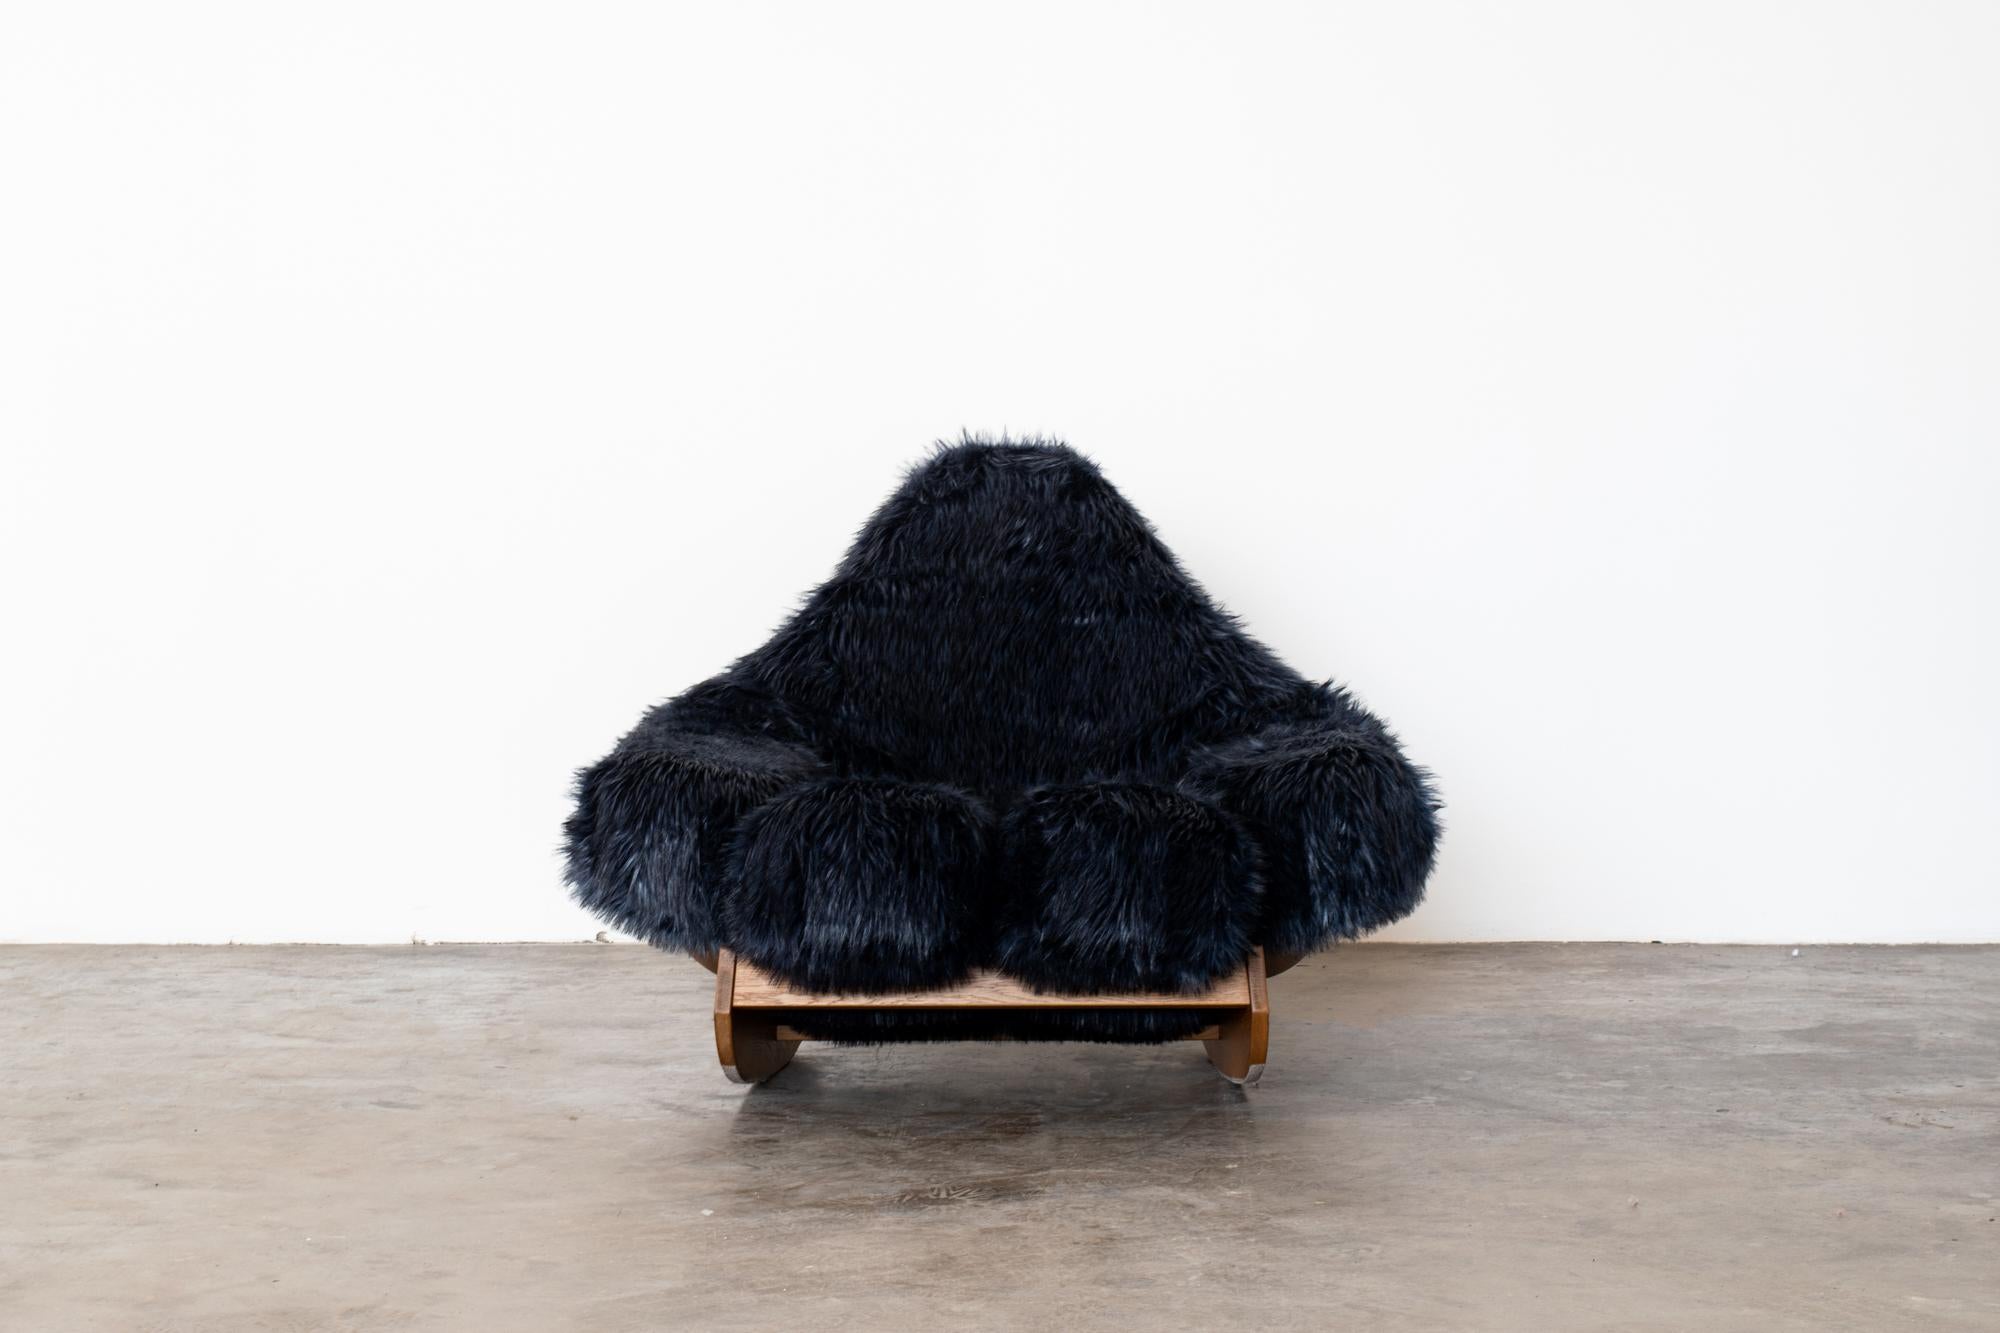 MARIO SCHEICHENBAUER
Rare Pop culture Yeti rocking chair for Elam, Italy - 1968. 
Oakwood frame, synthetic fur upholstery.
Depth 128 x Width 116 x Height 91  cm

This rare Abominable Snowman 'Yeti' rocking chair dating with its structure hosting a